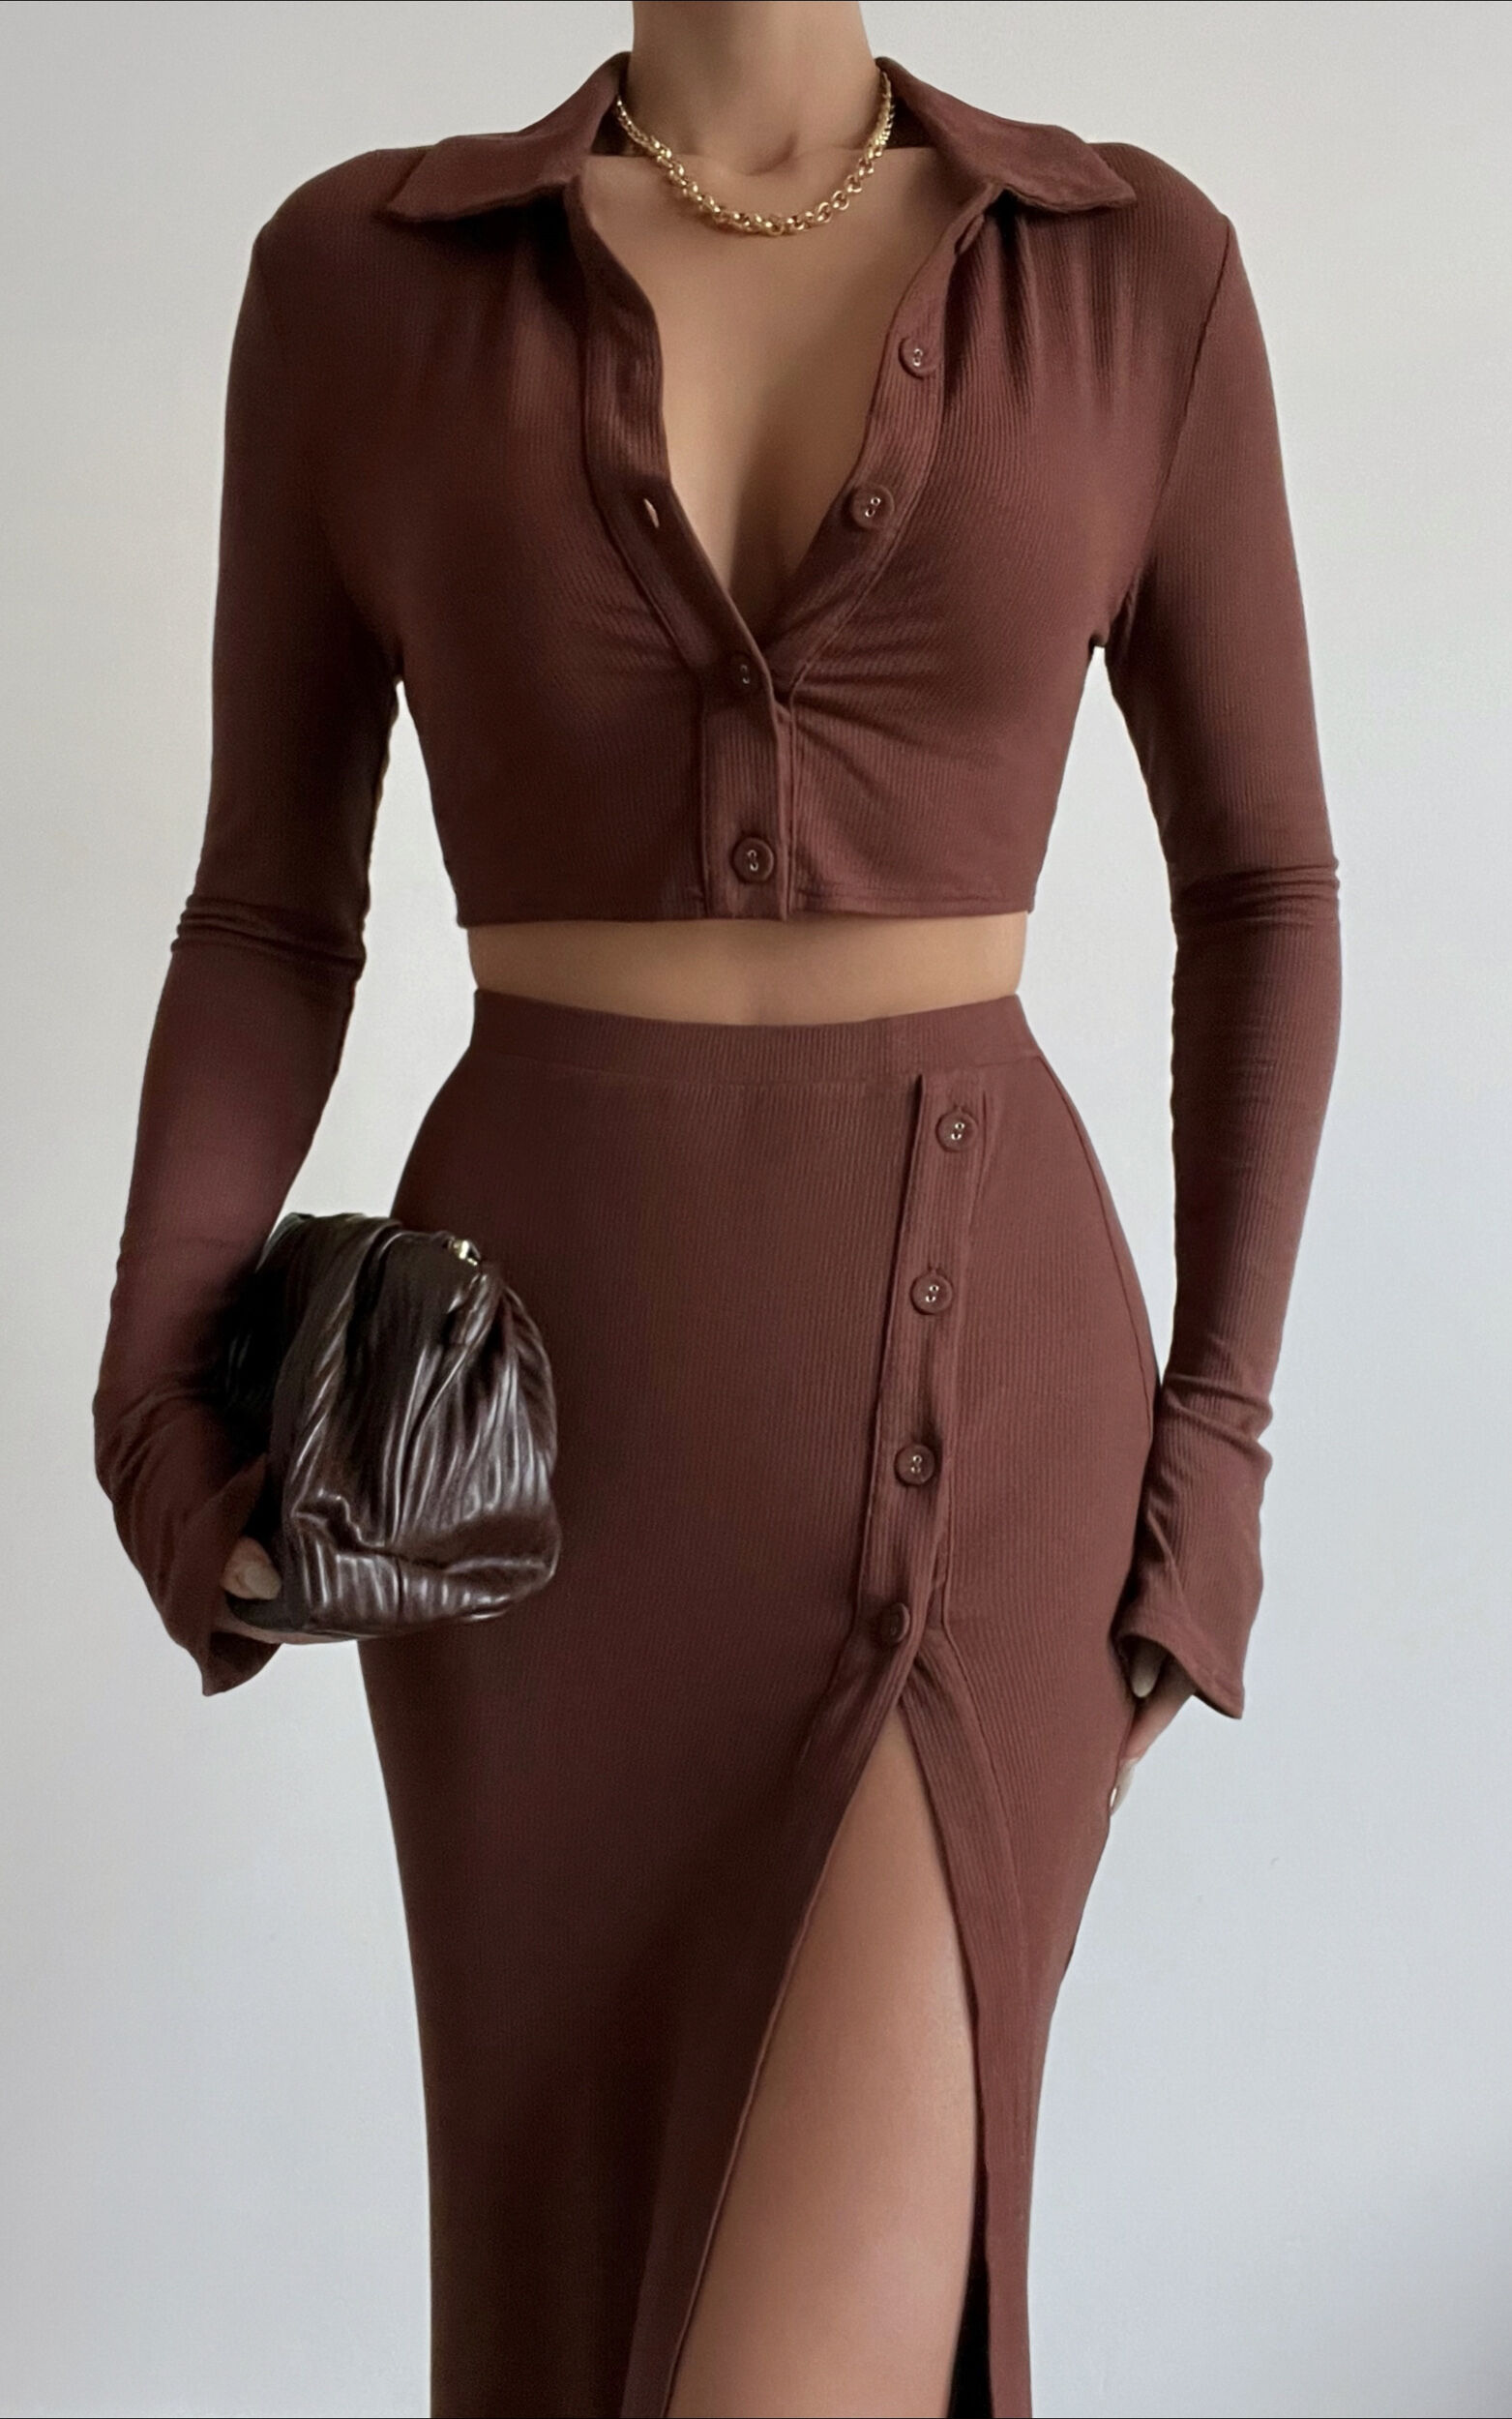 Meschelle Two Piece Set - Collared Front Crop Top and Side Split Midaxi Skirt Set in Chocolate - 04, BRN1